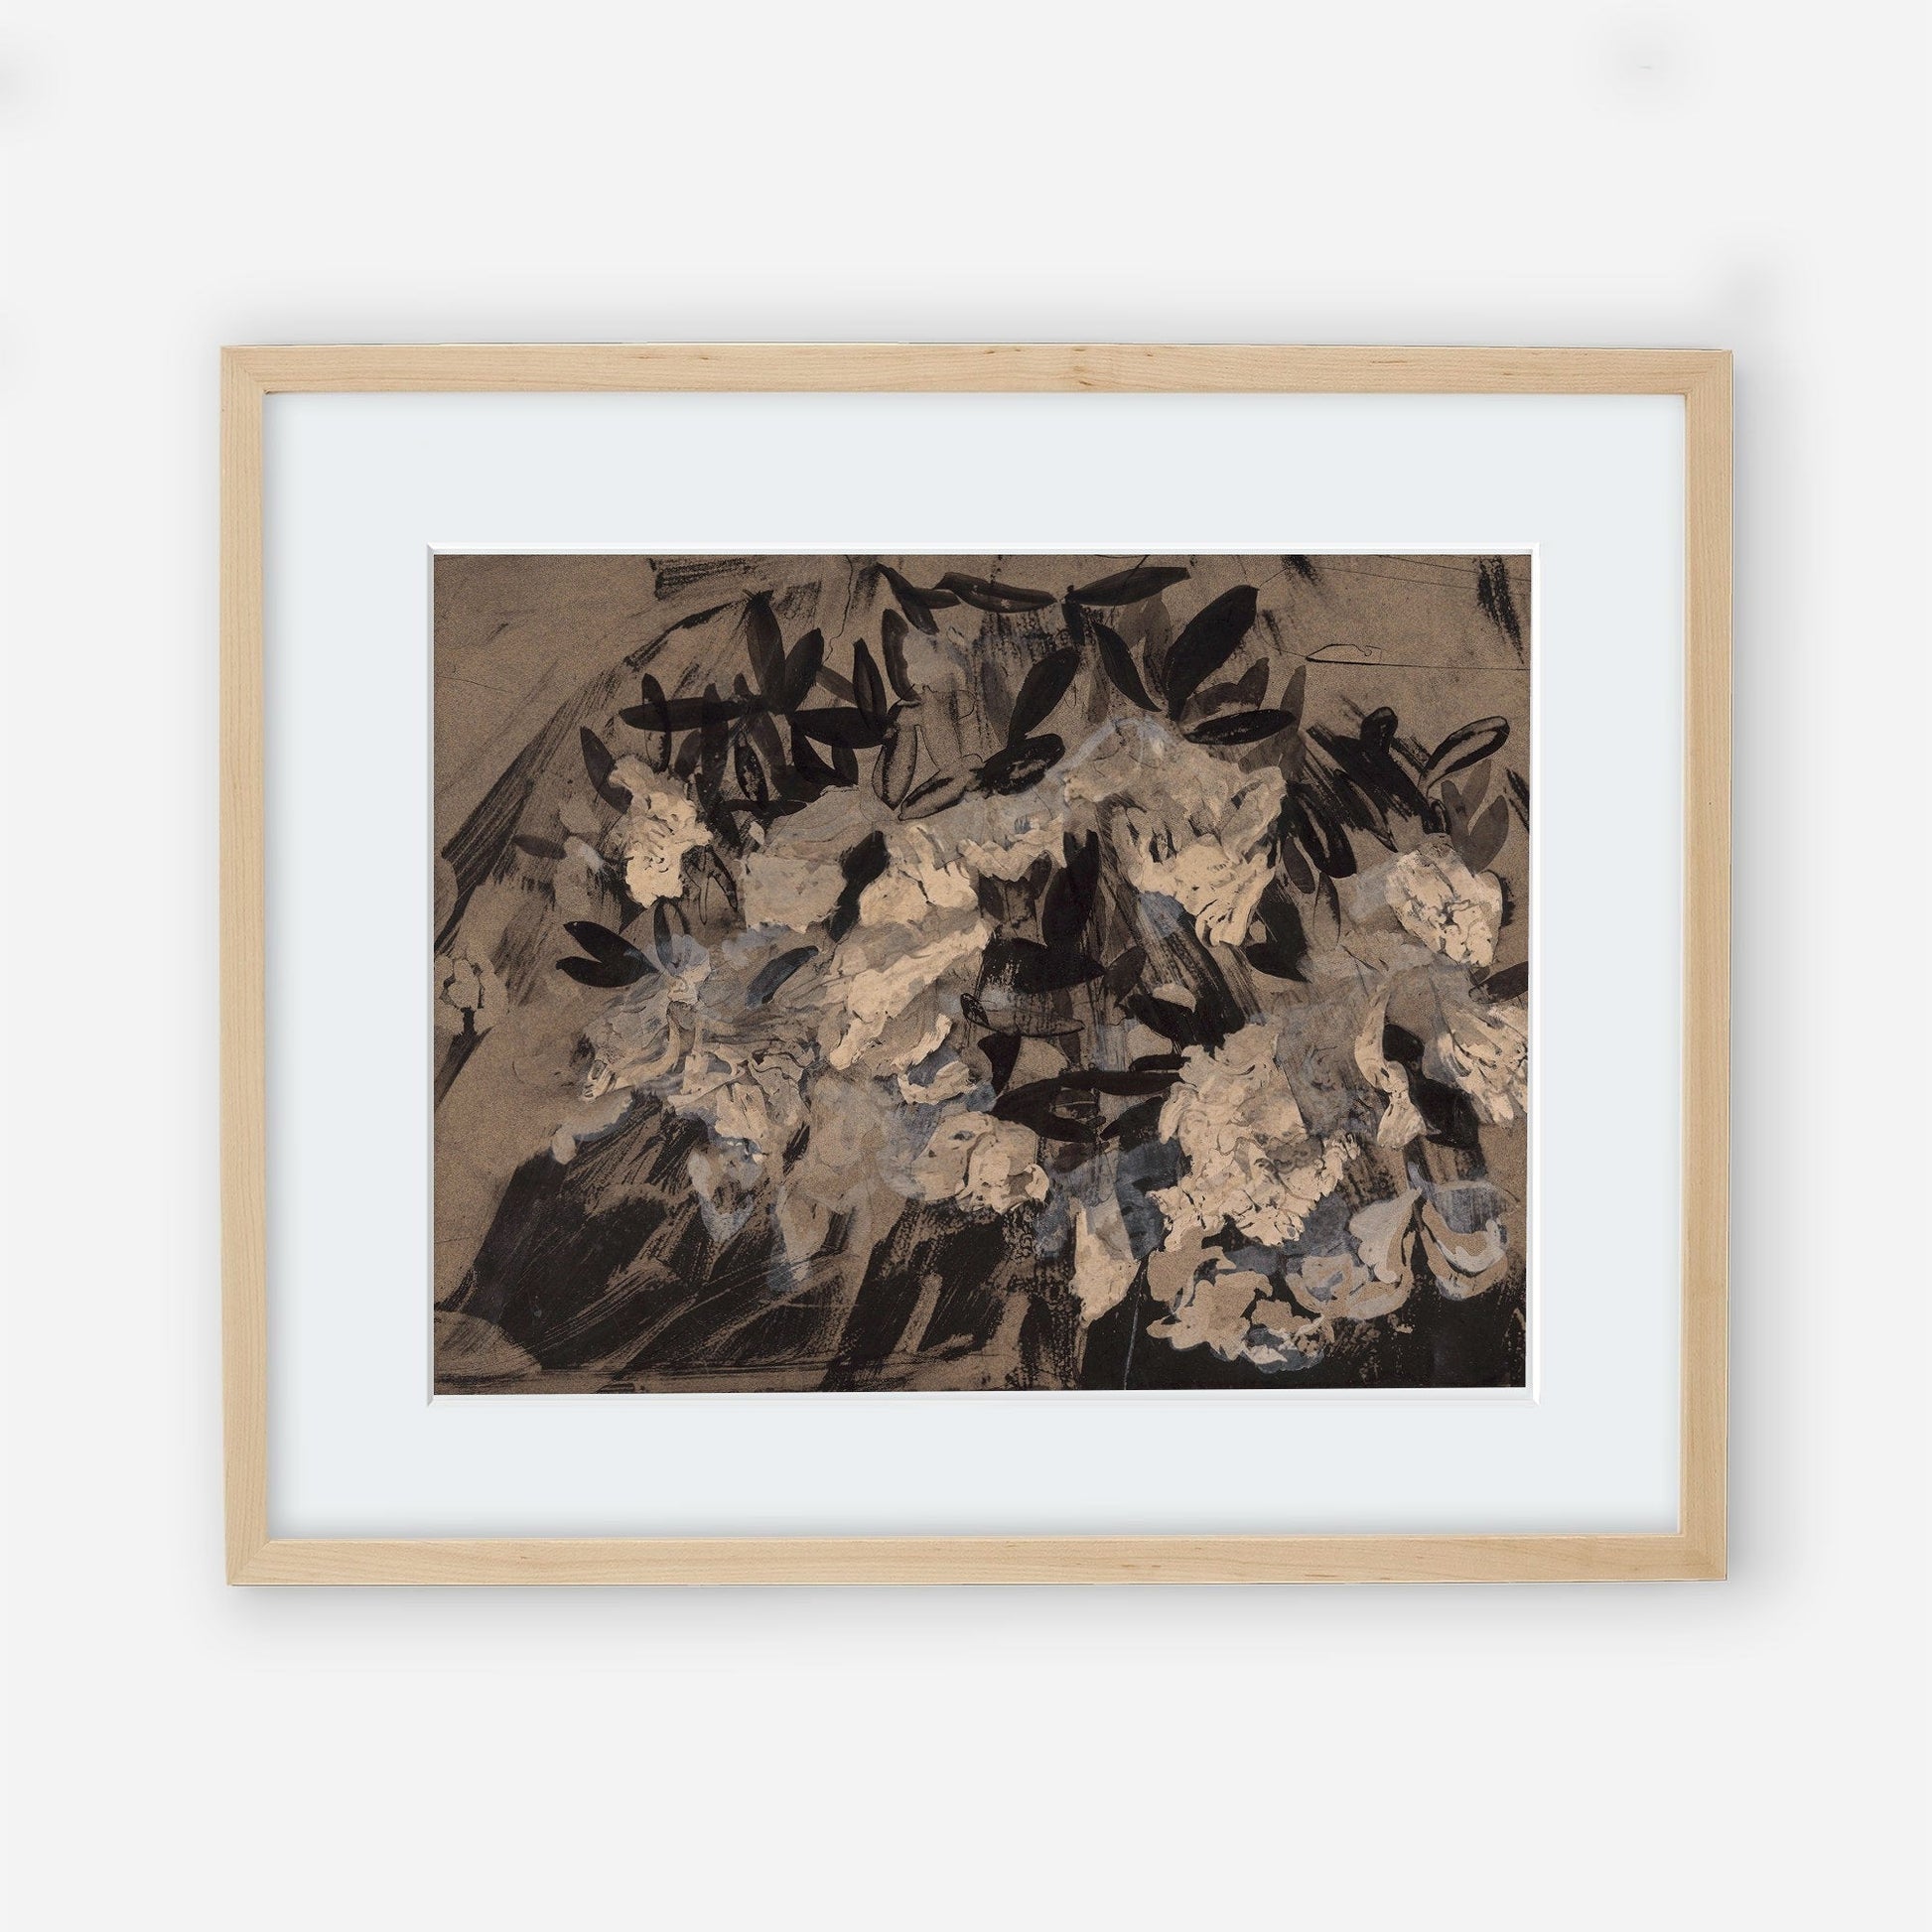 Flowers 2 Vintage Floral Wall Art - Dark Floral Bedroom Wall Print Poster - Printed and Shipped Reproduction - Oversize prints